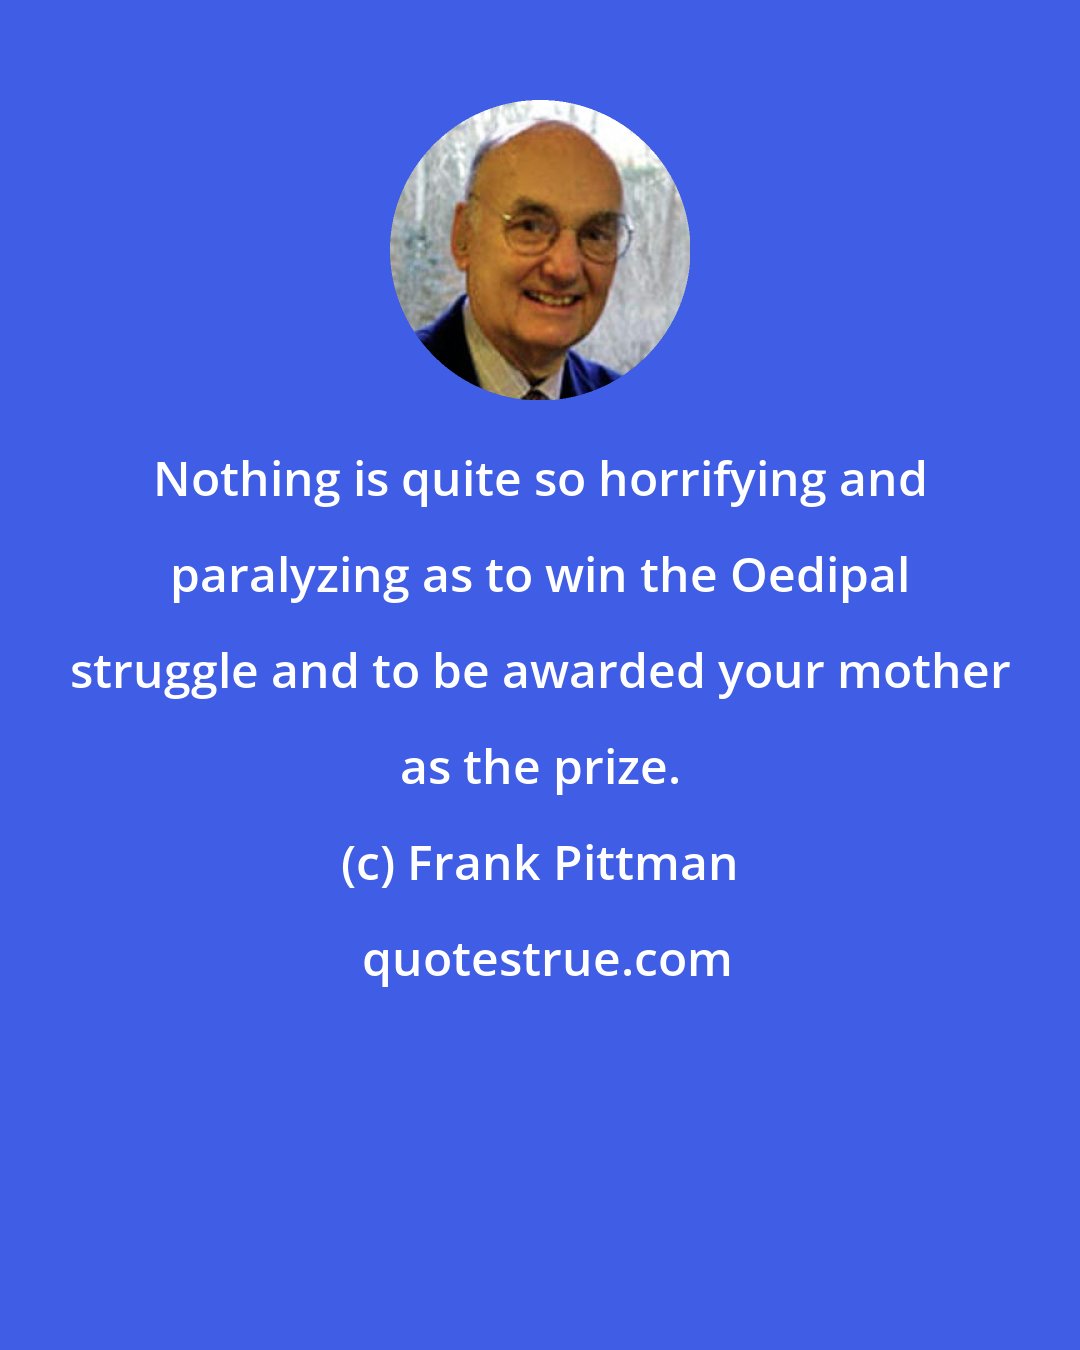 Frank Pittman: Nothing is quite so horrifying and paralyzing as to win the Oedipal struggle and to be awarded your mother as the prize.